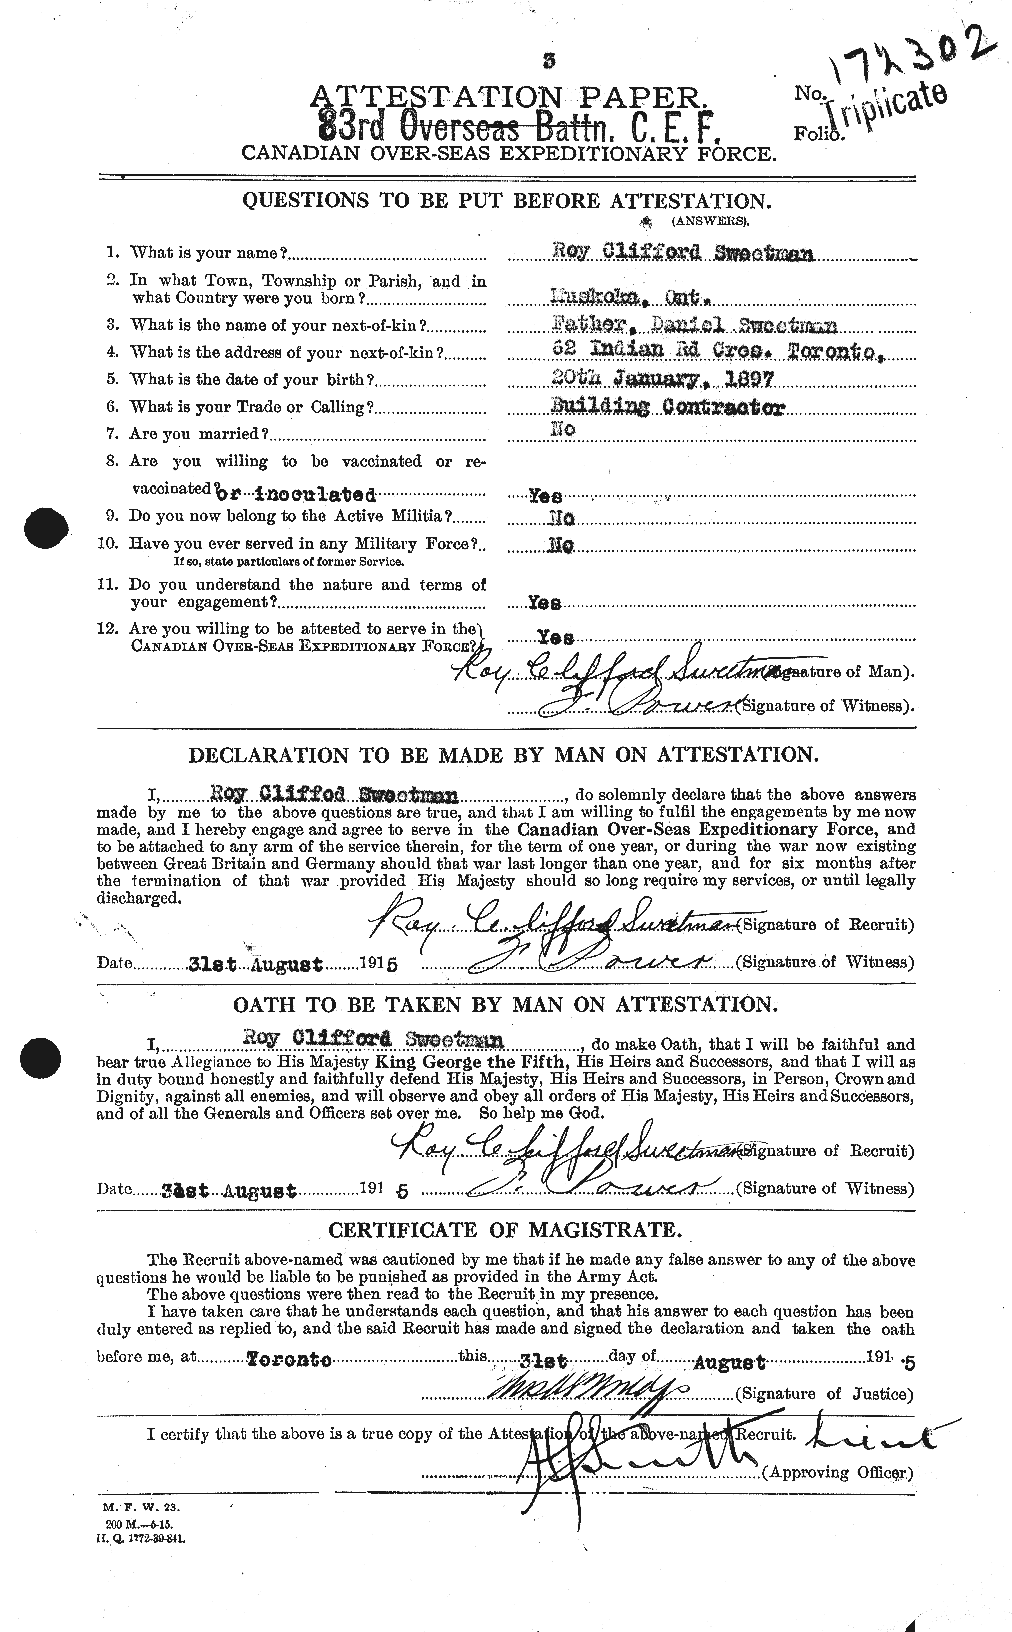 Personnel Records of the First World War - CEF 624729a